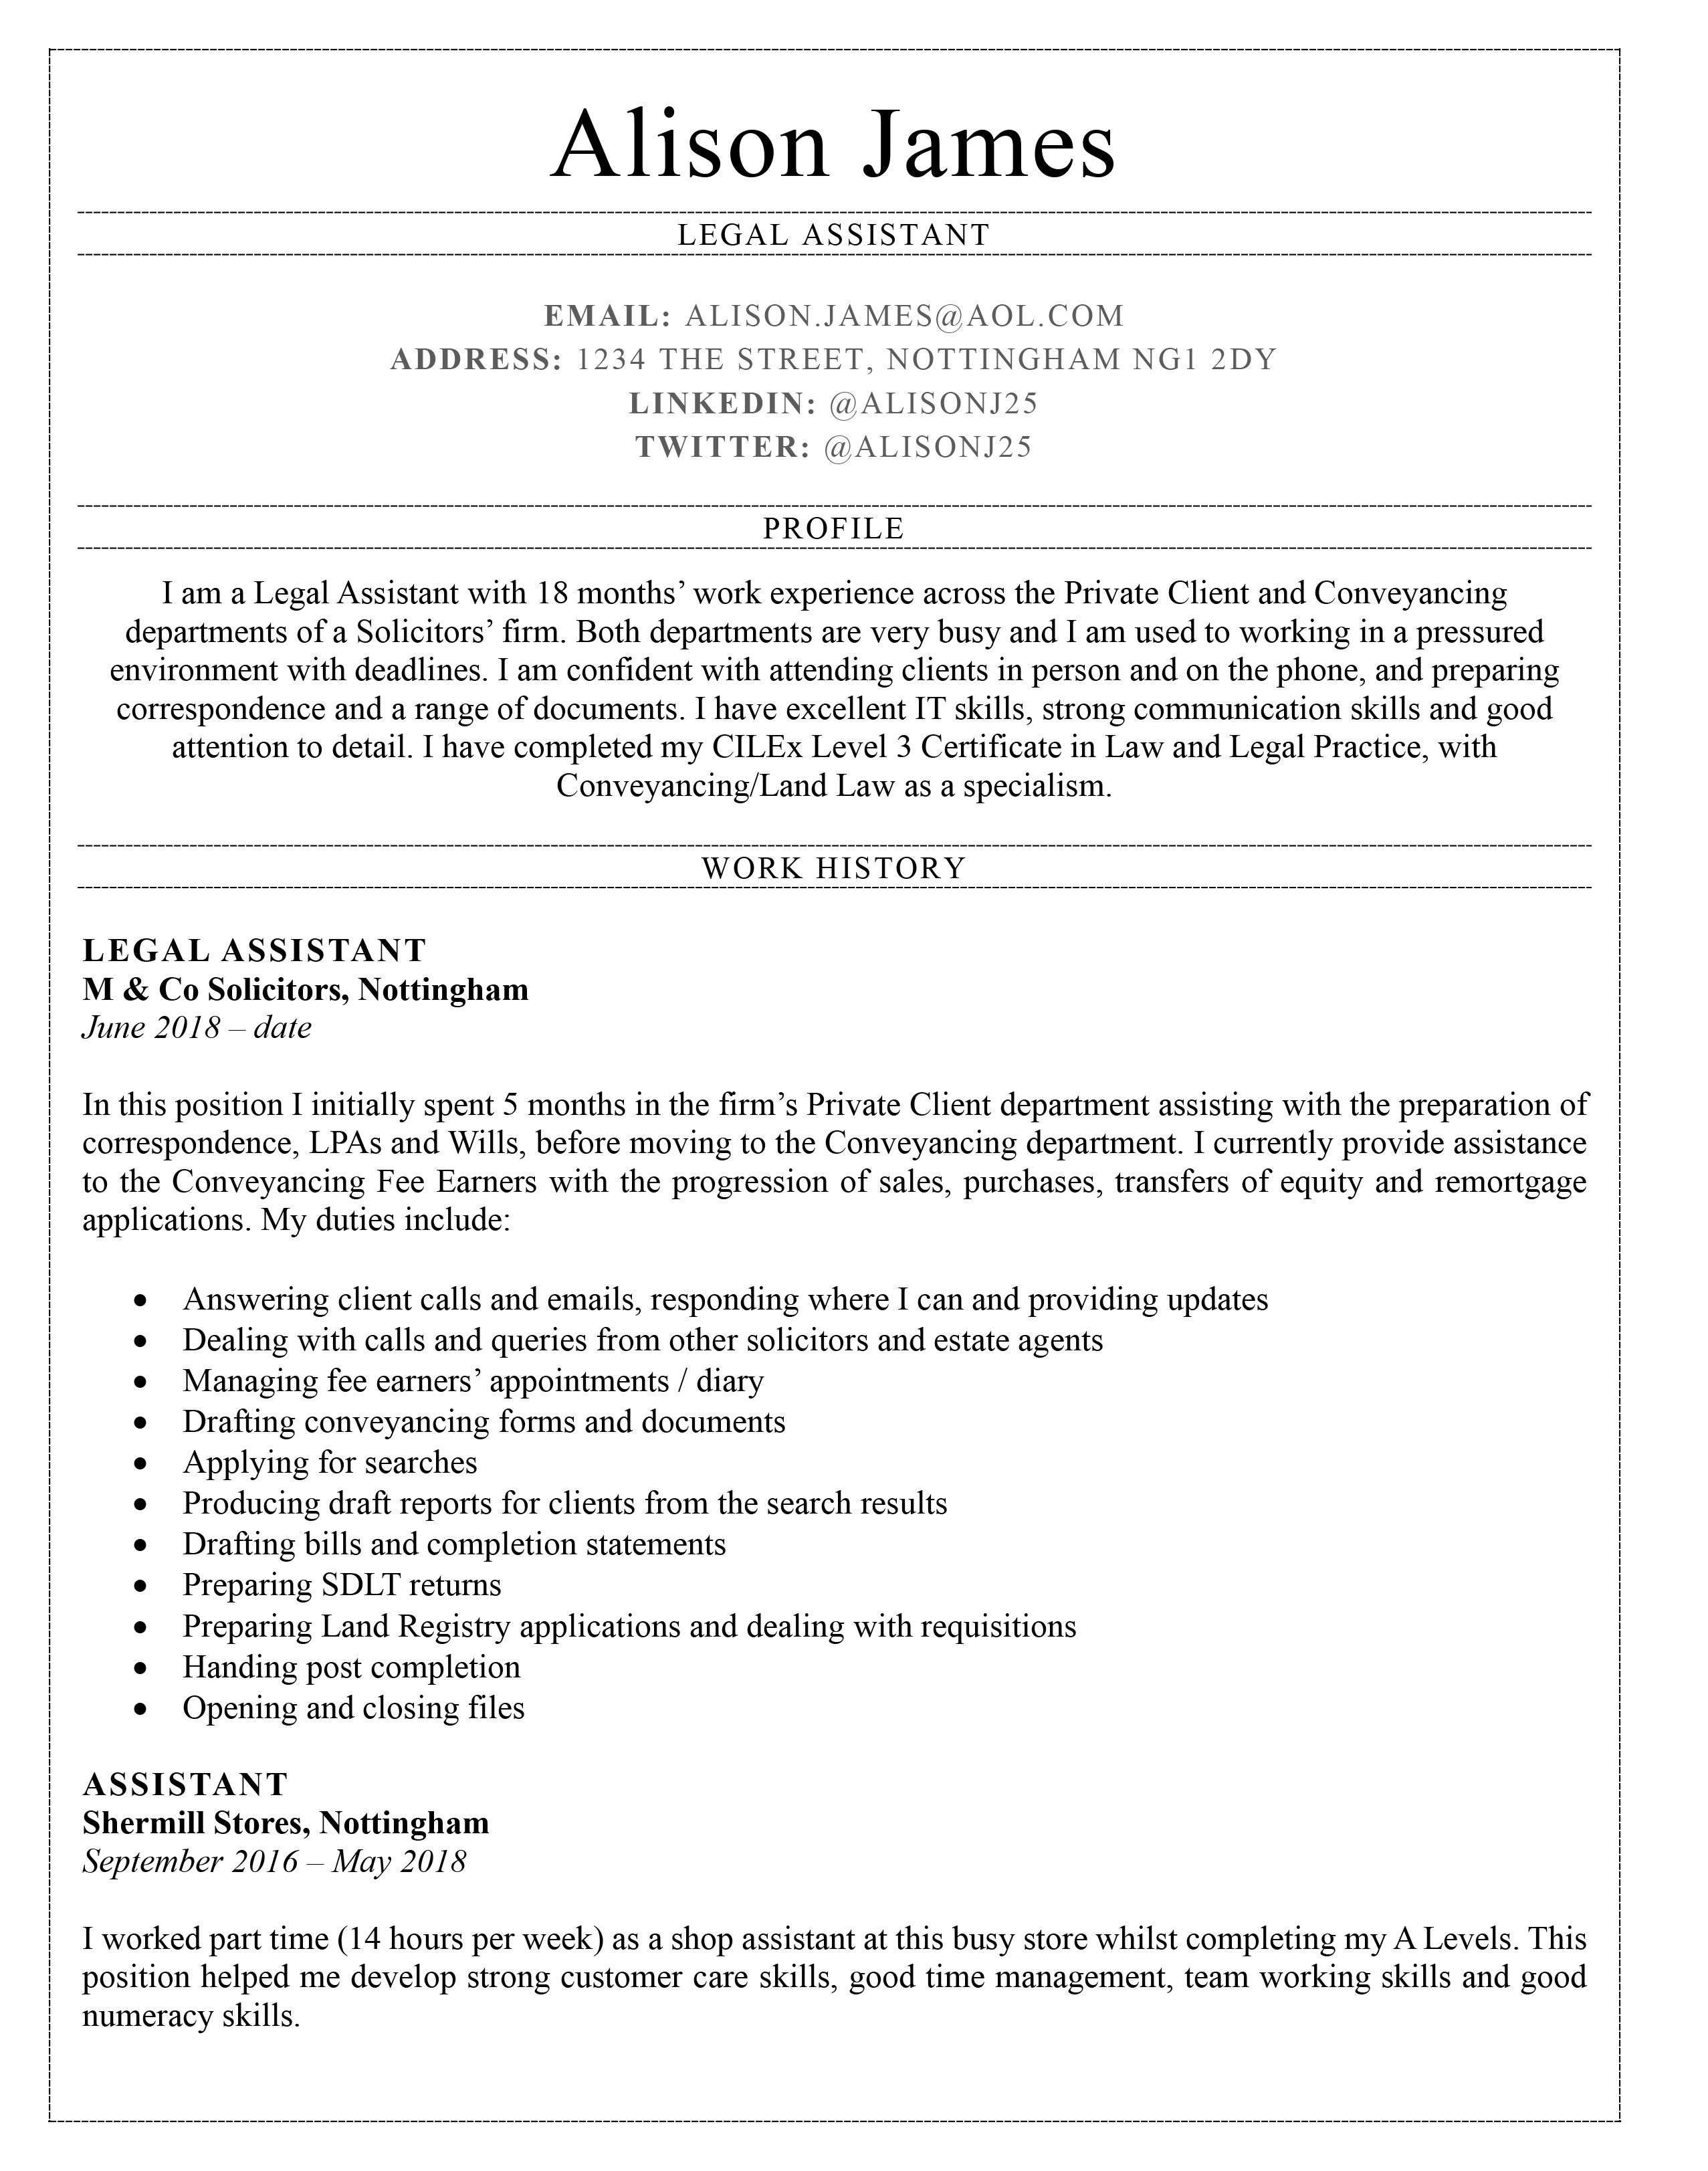 Legal Assistant CV template - page one